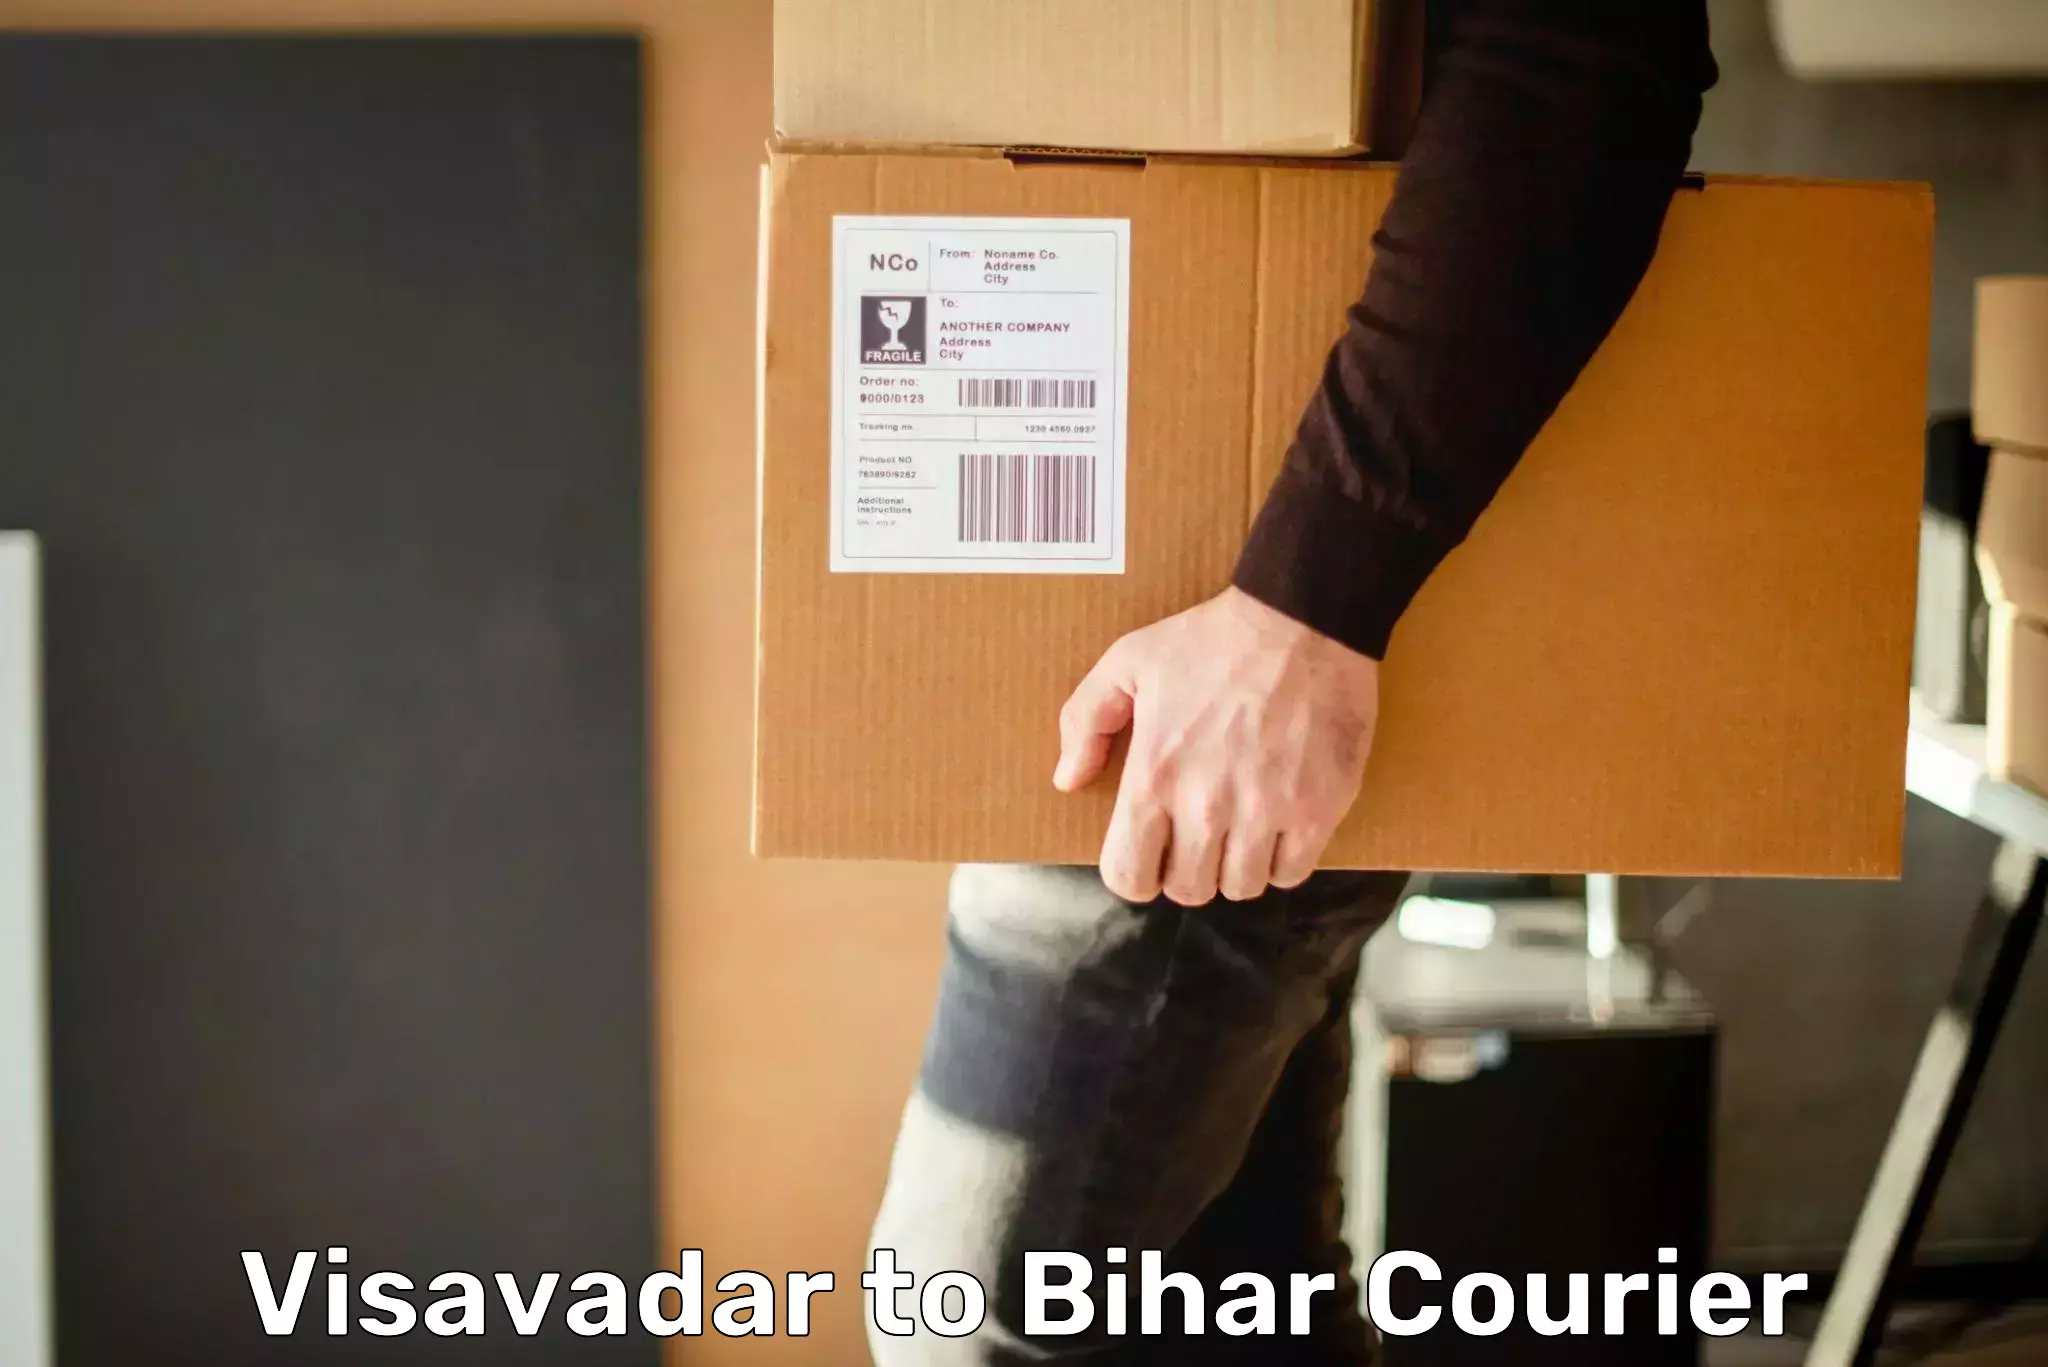 Specialized courier services Visavadar to Biraul